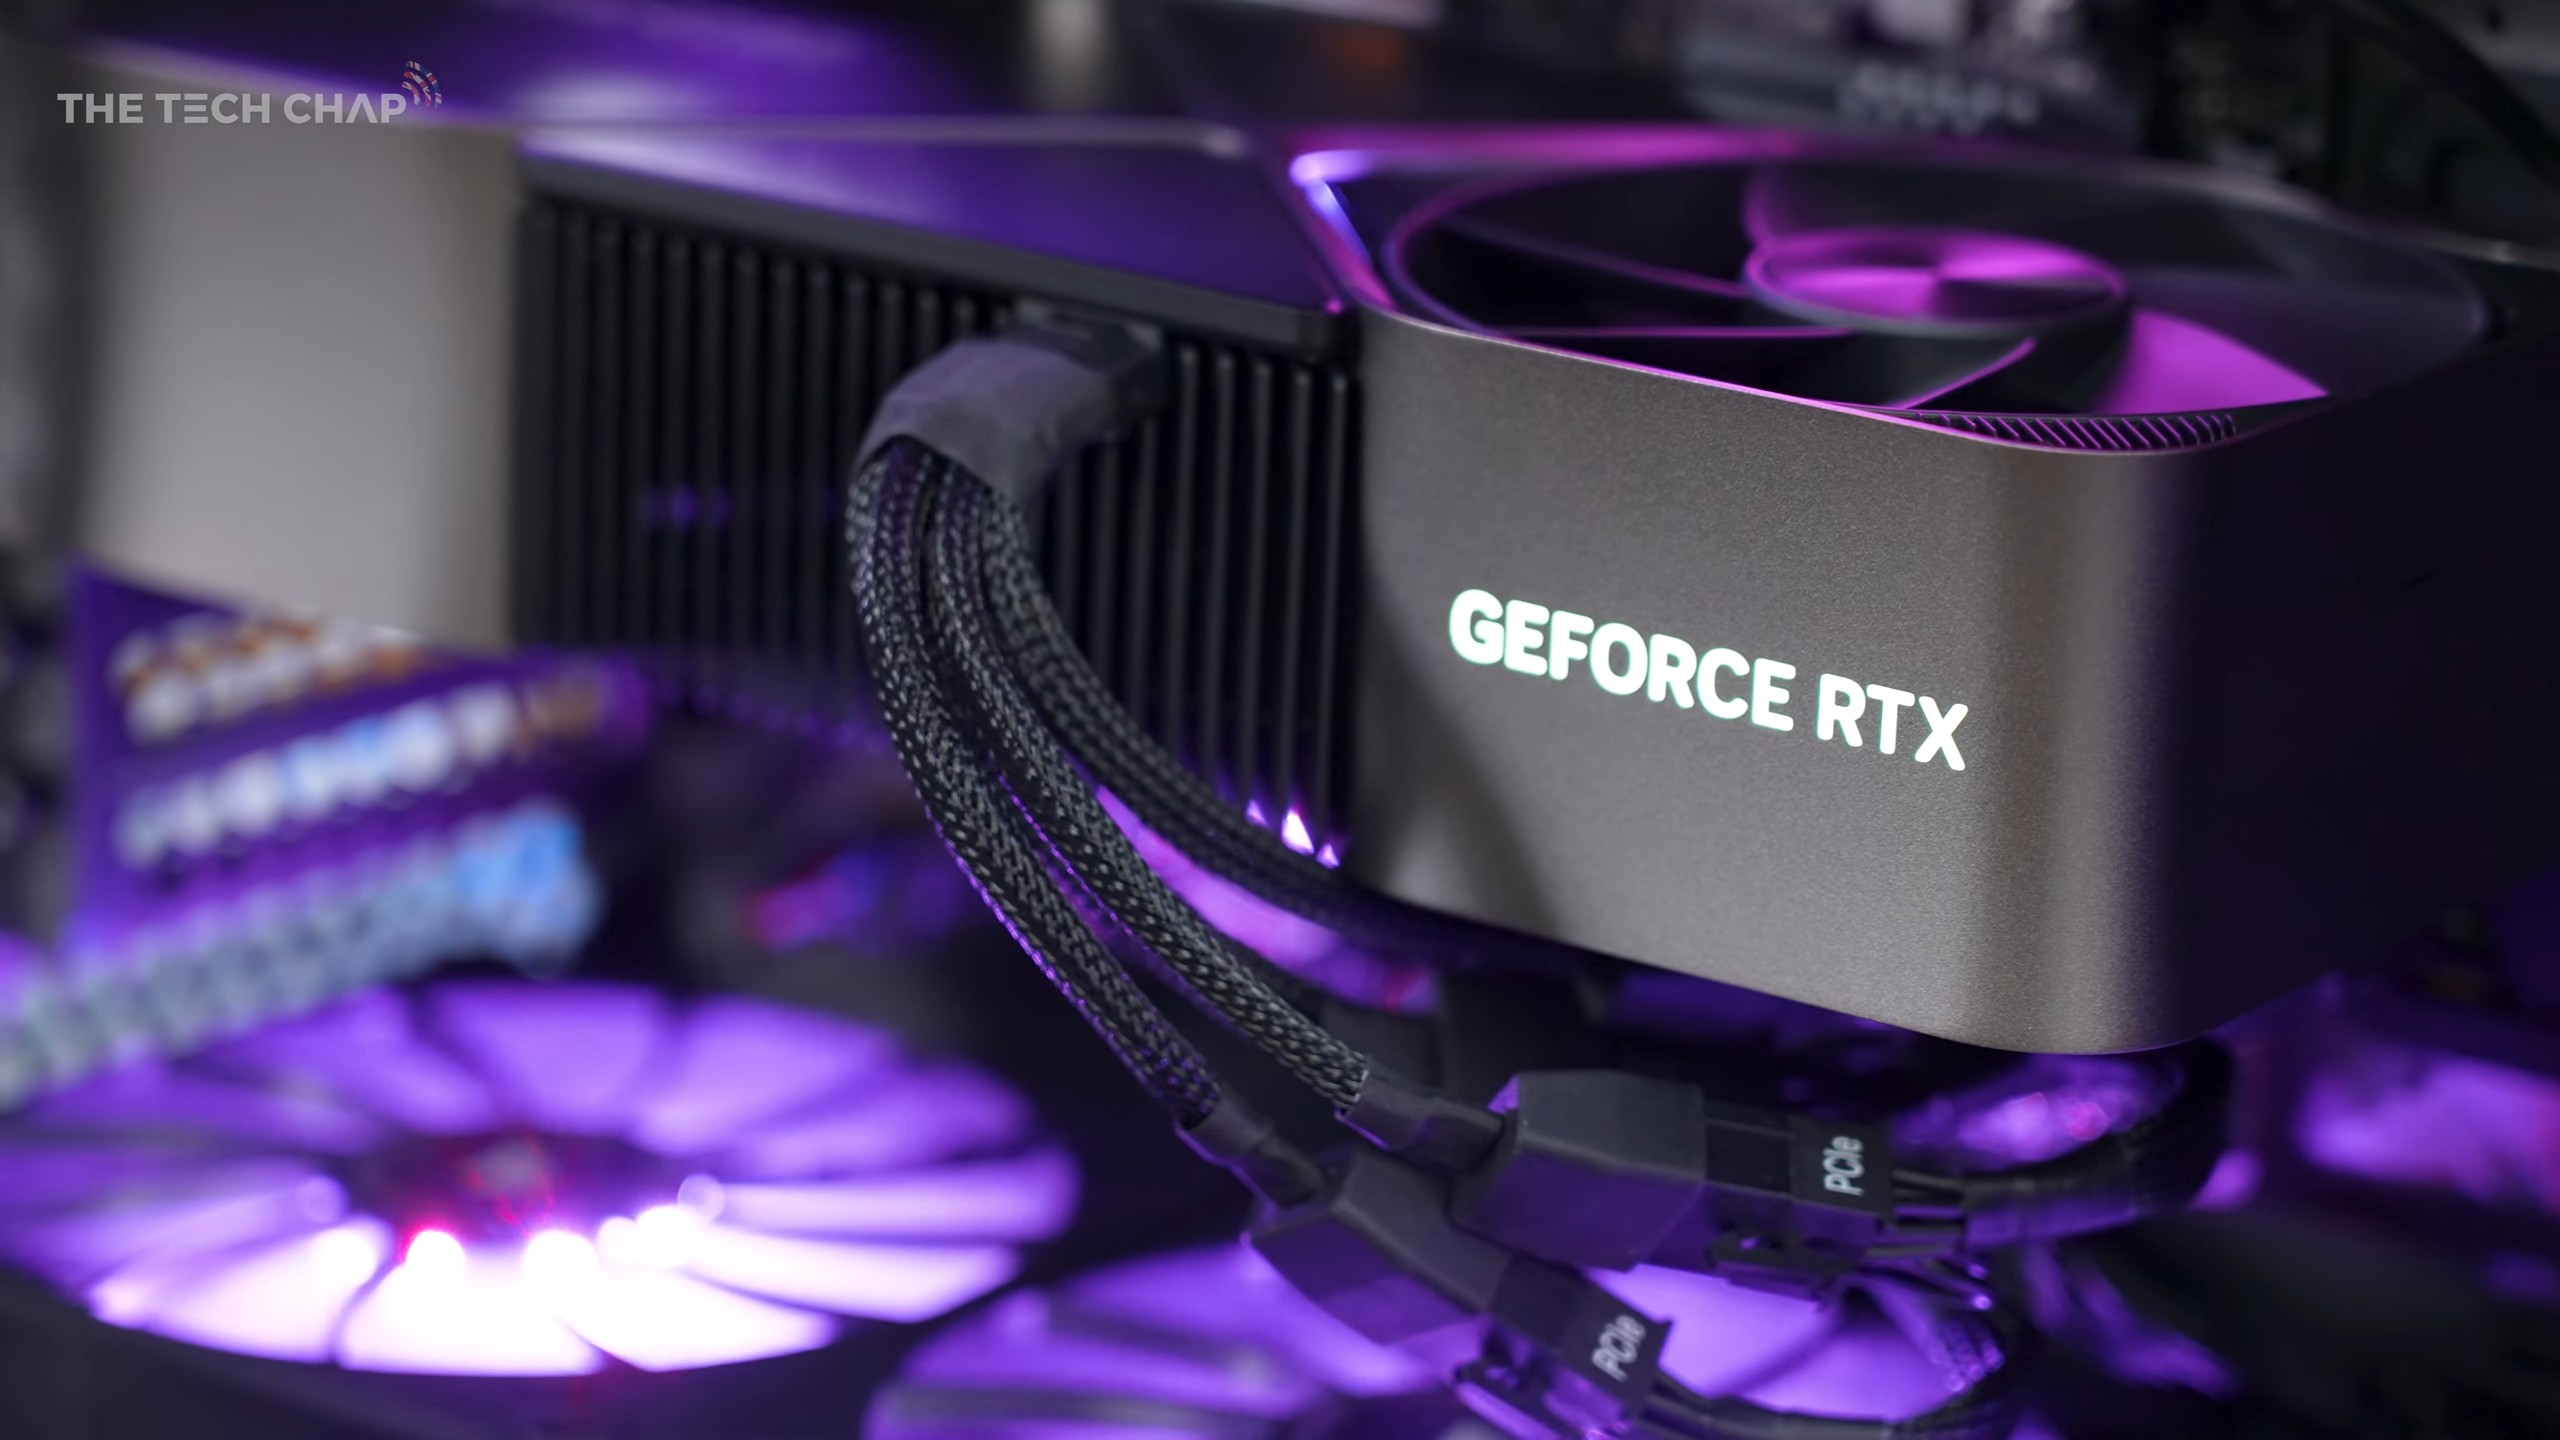 NVIDIA GeForce RTX 4090 Ti rumored to feature 18176 cores and 24GB/24Gbps memory - VideoCardz.com